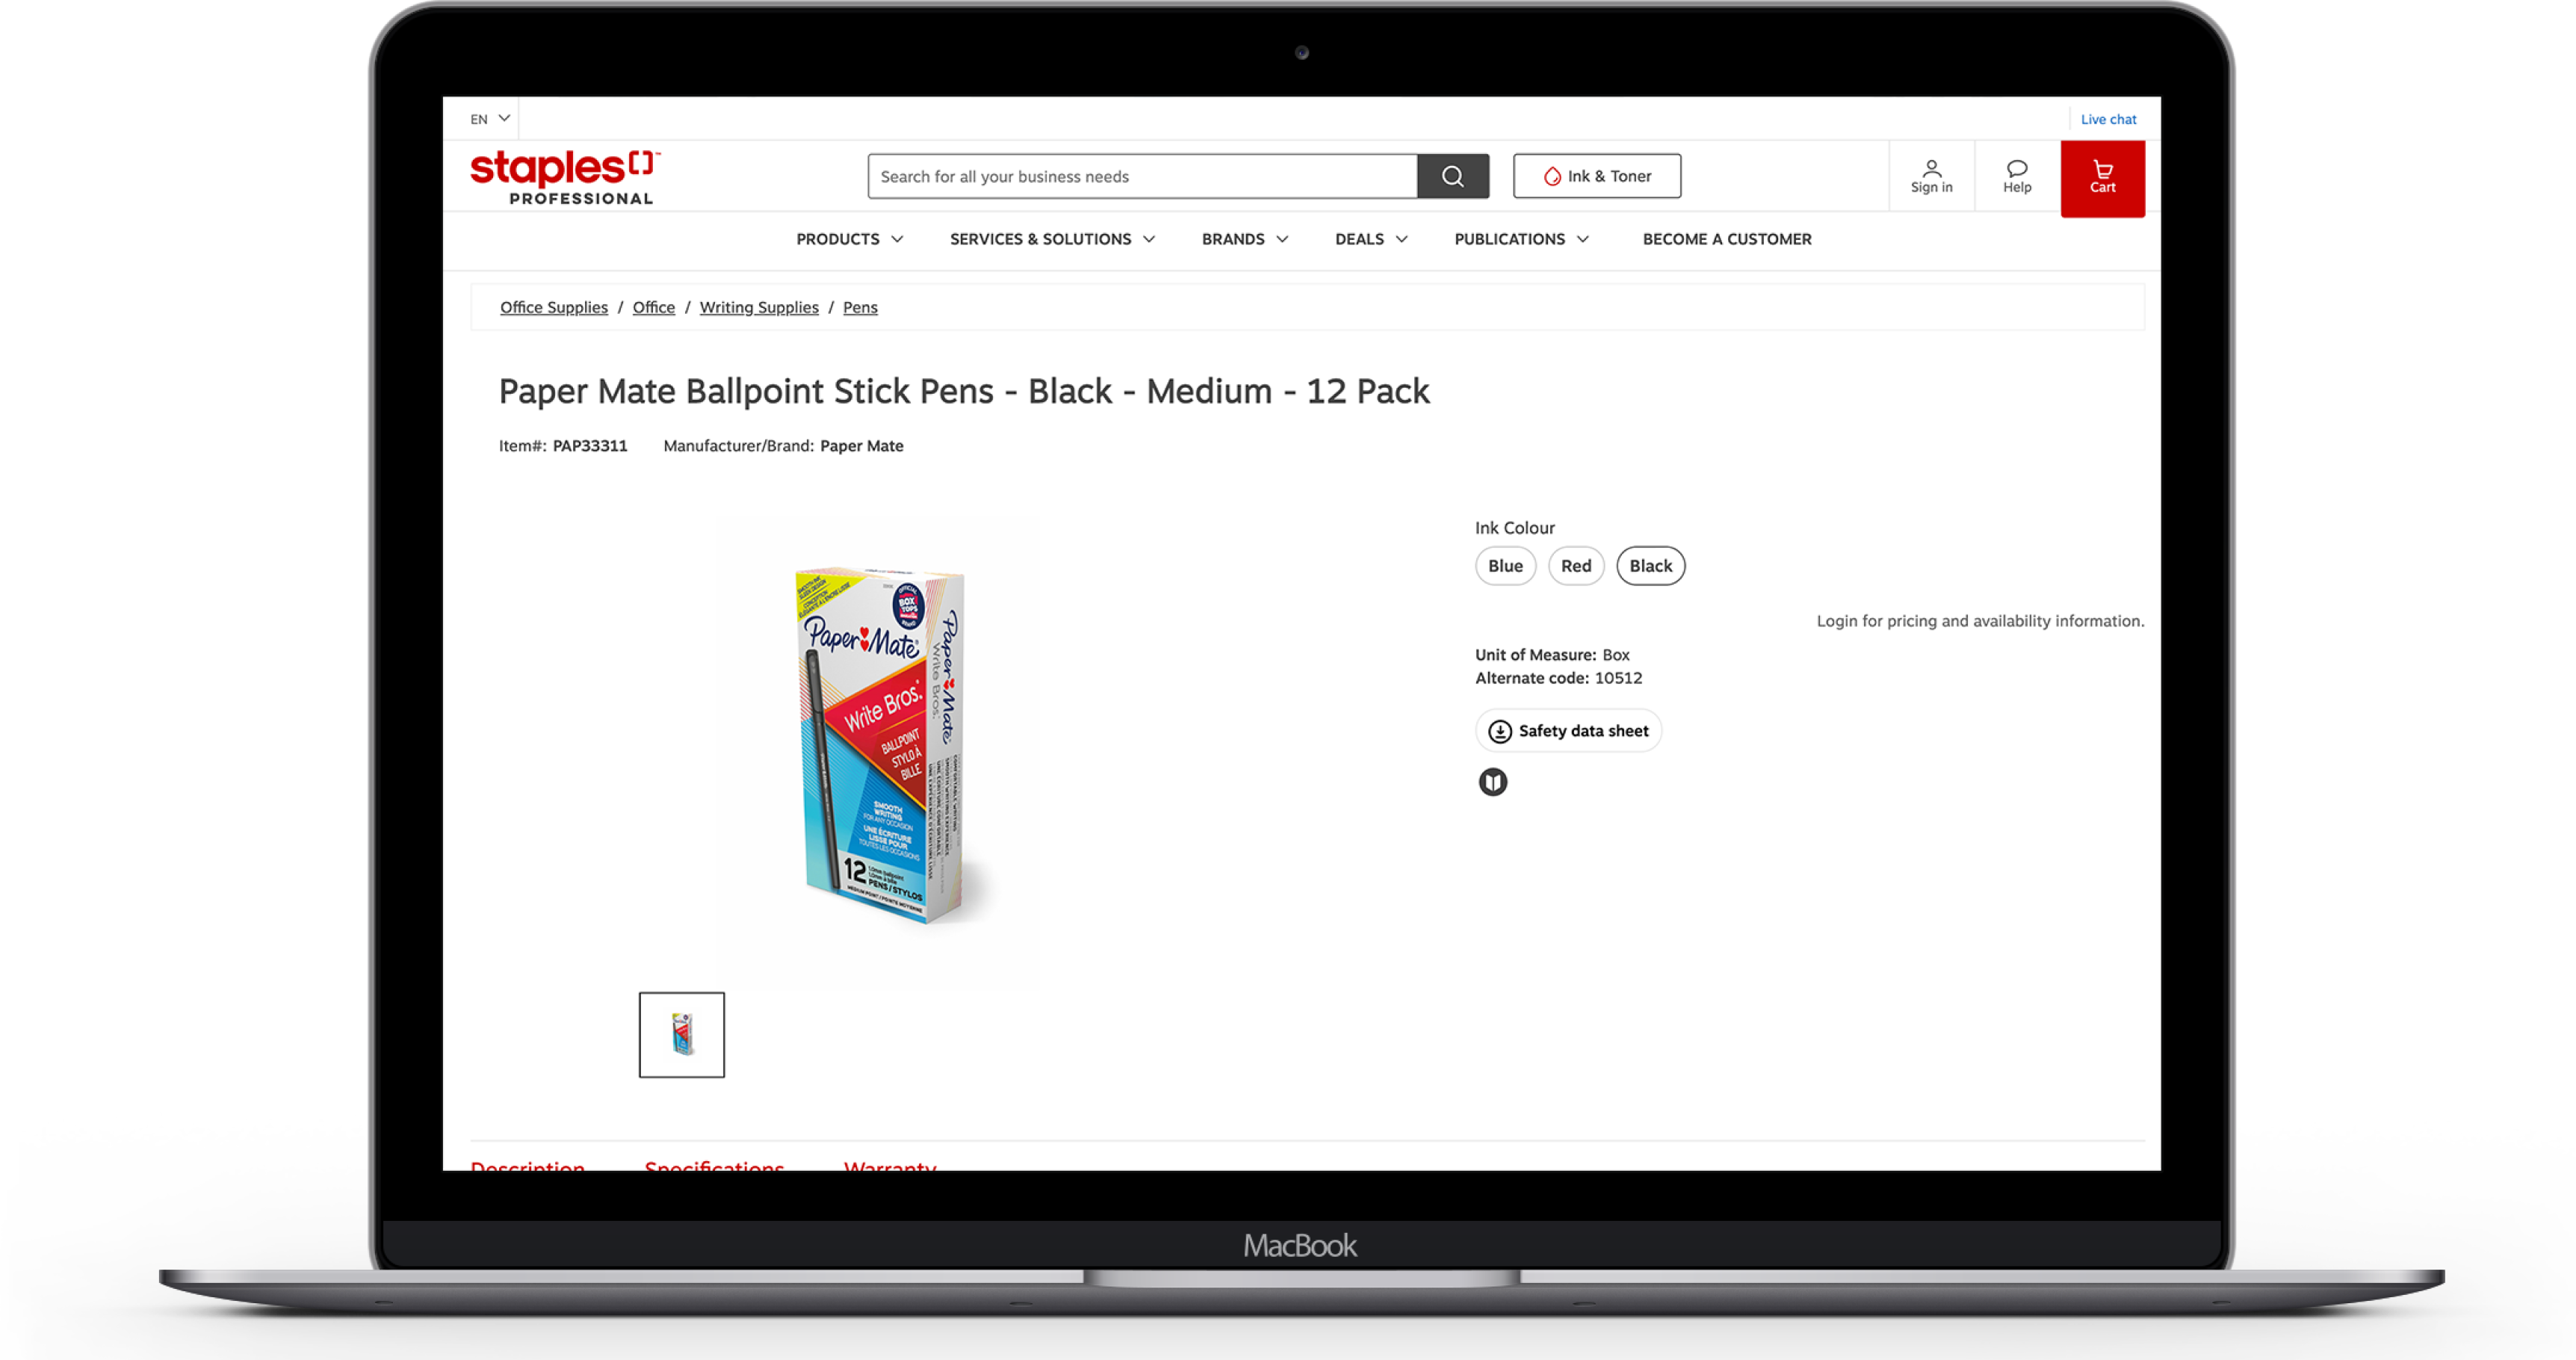 product page design of staples